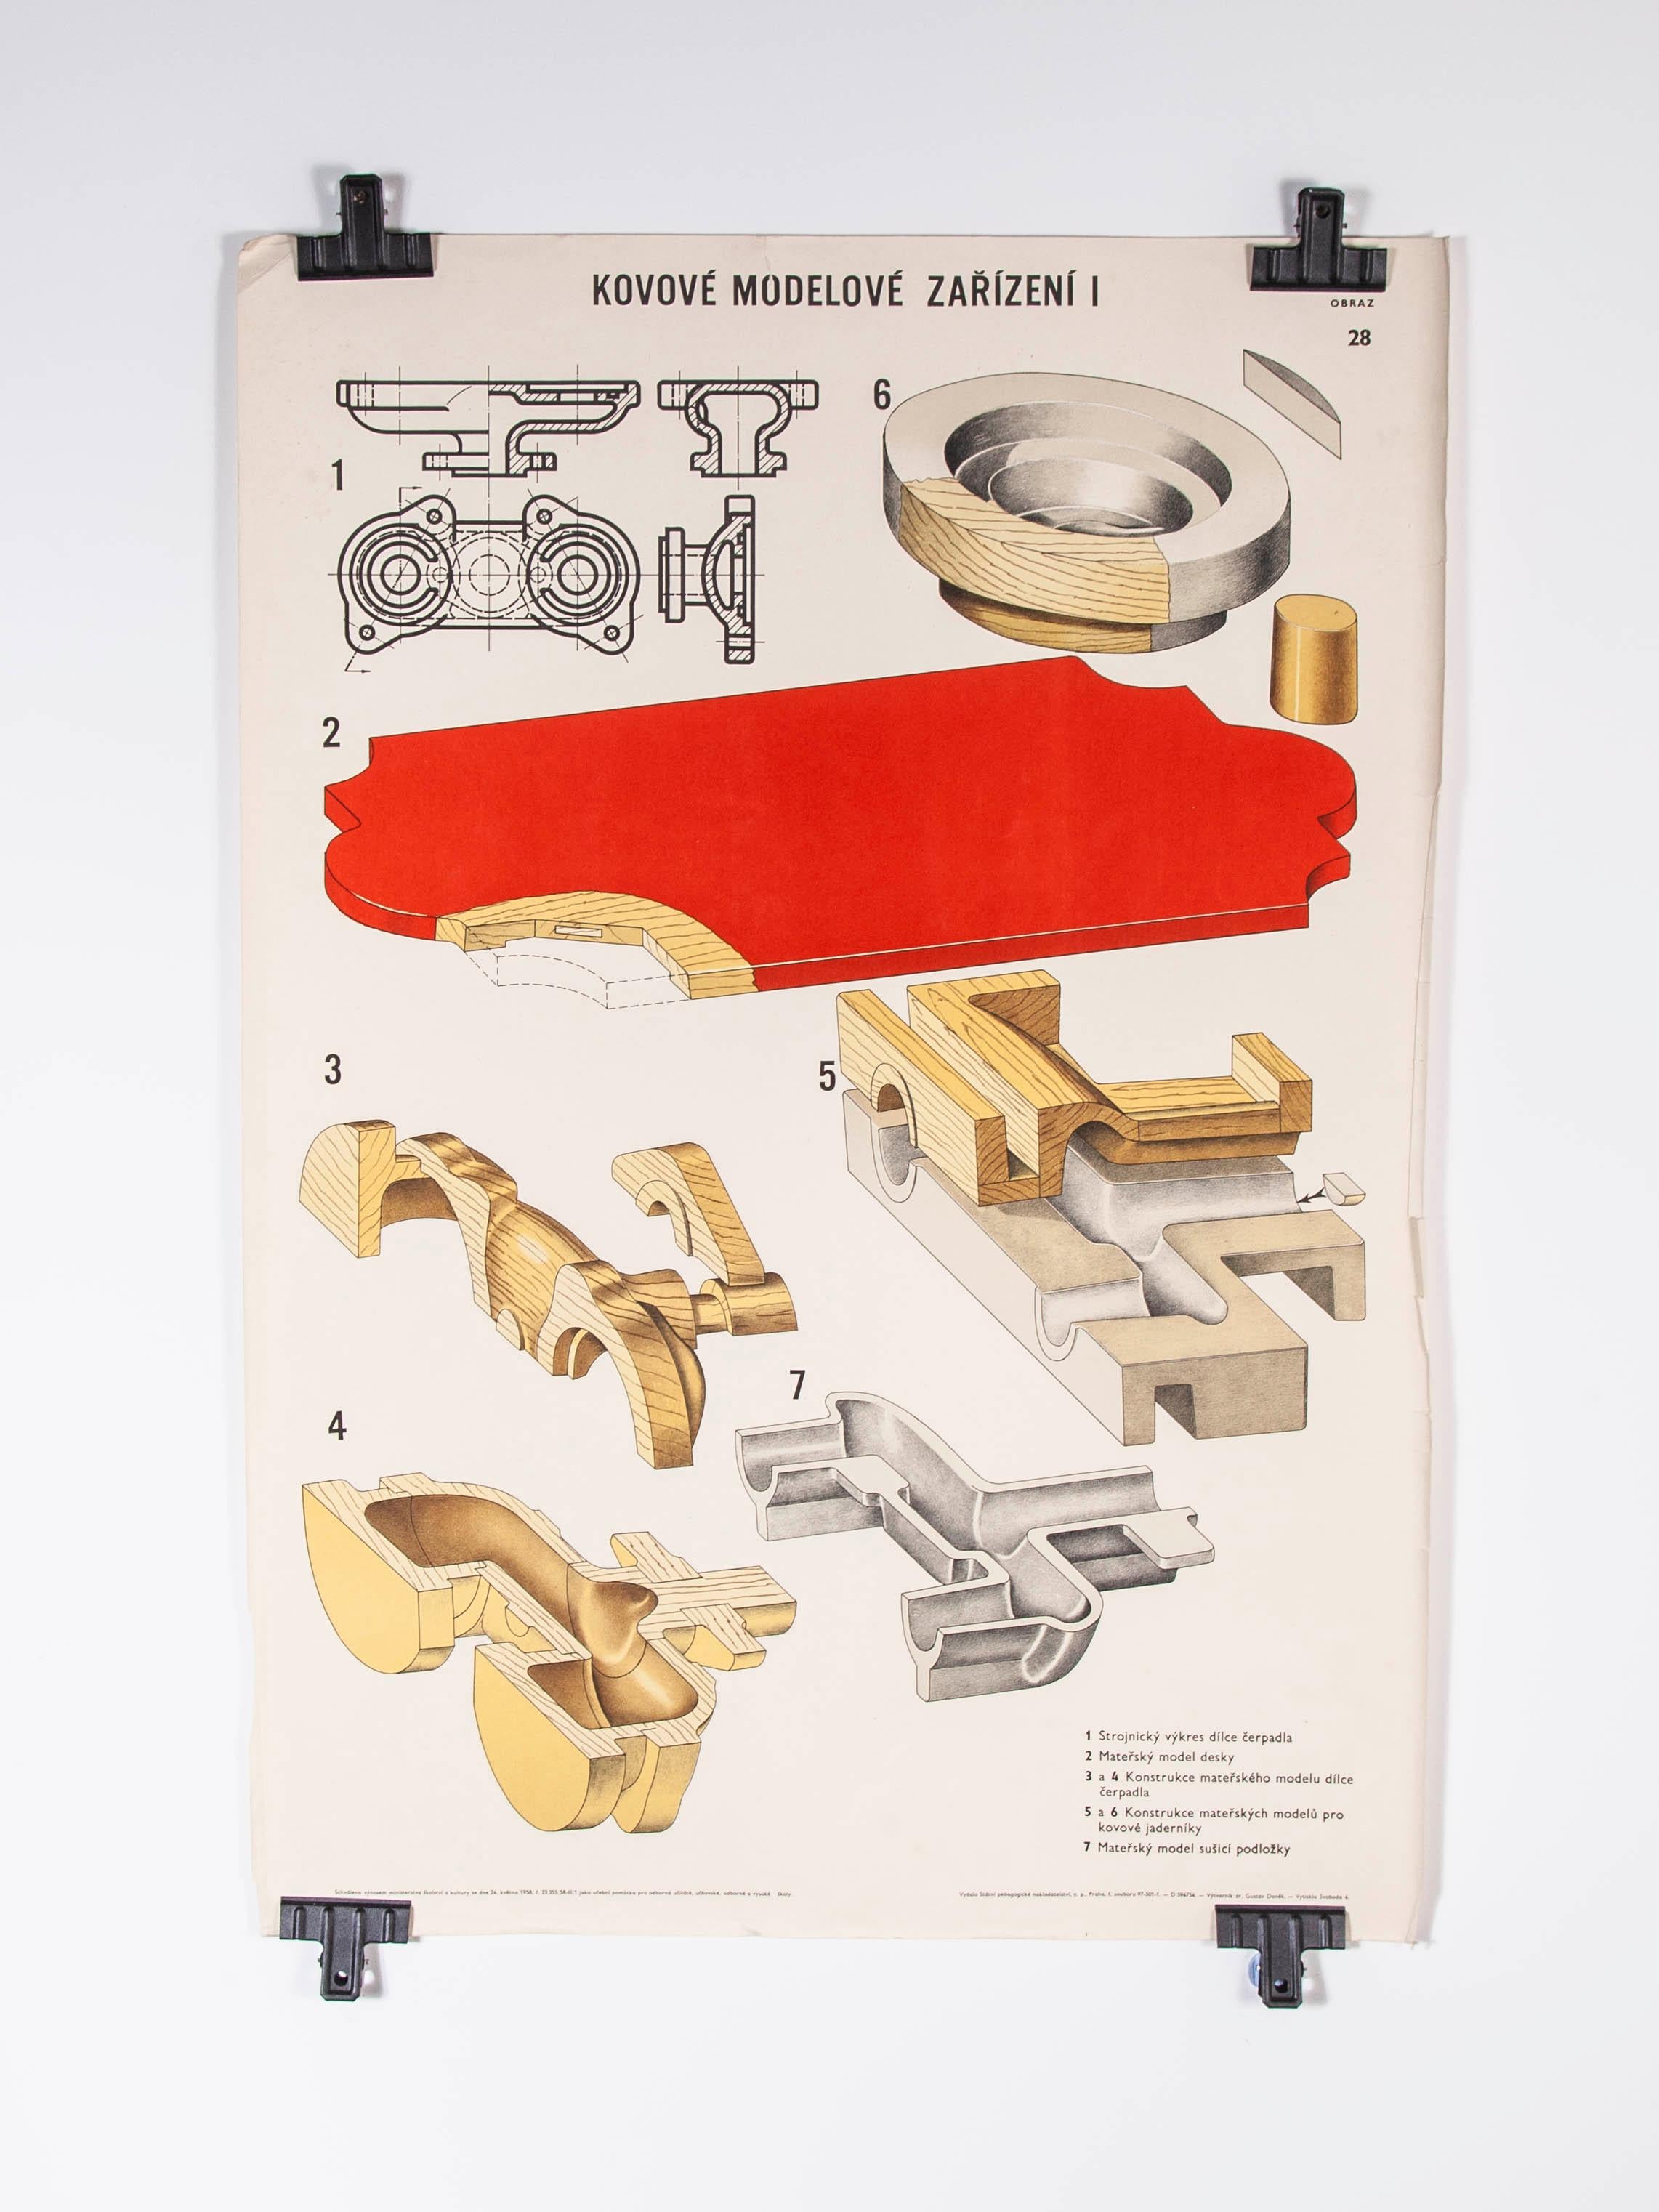 Czech technical industrial drawing, foundry mould engineering poster – 29

Sourced from an old engineering workshop in the Czech Republic, an amazing series of technical Industrial drawings explaining the process of sand casting and creating the